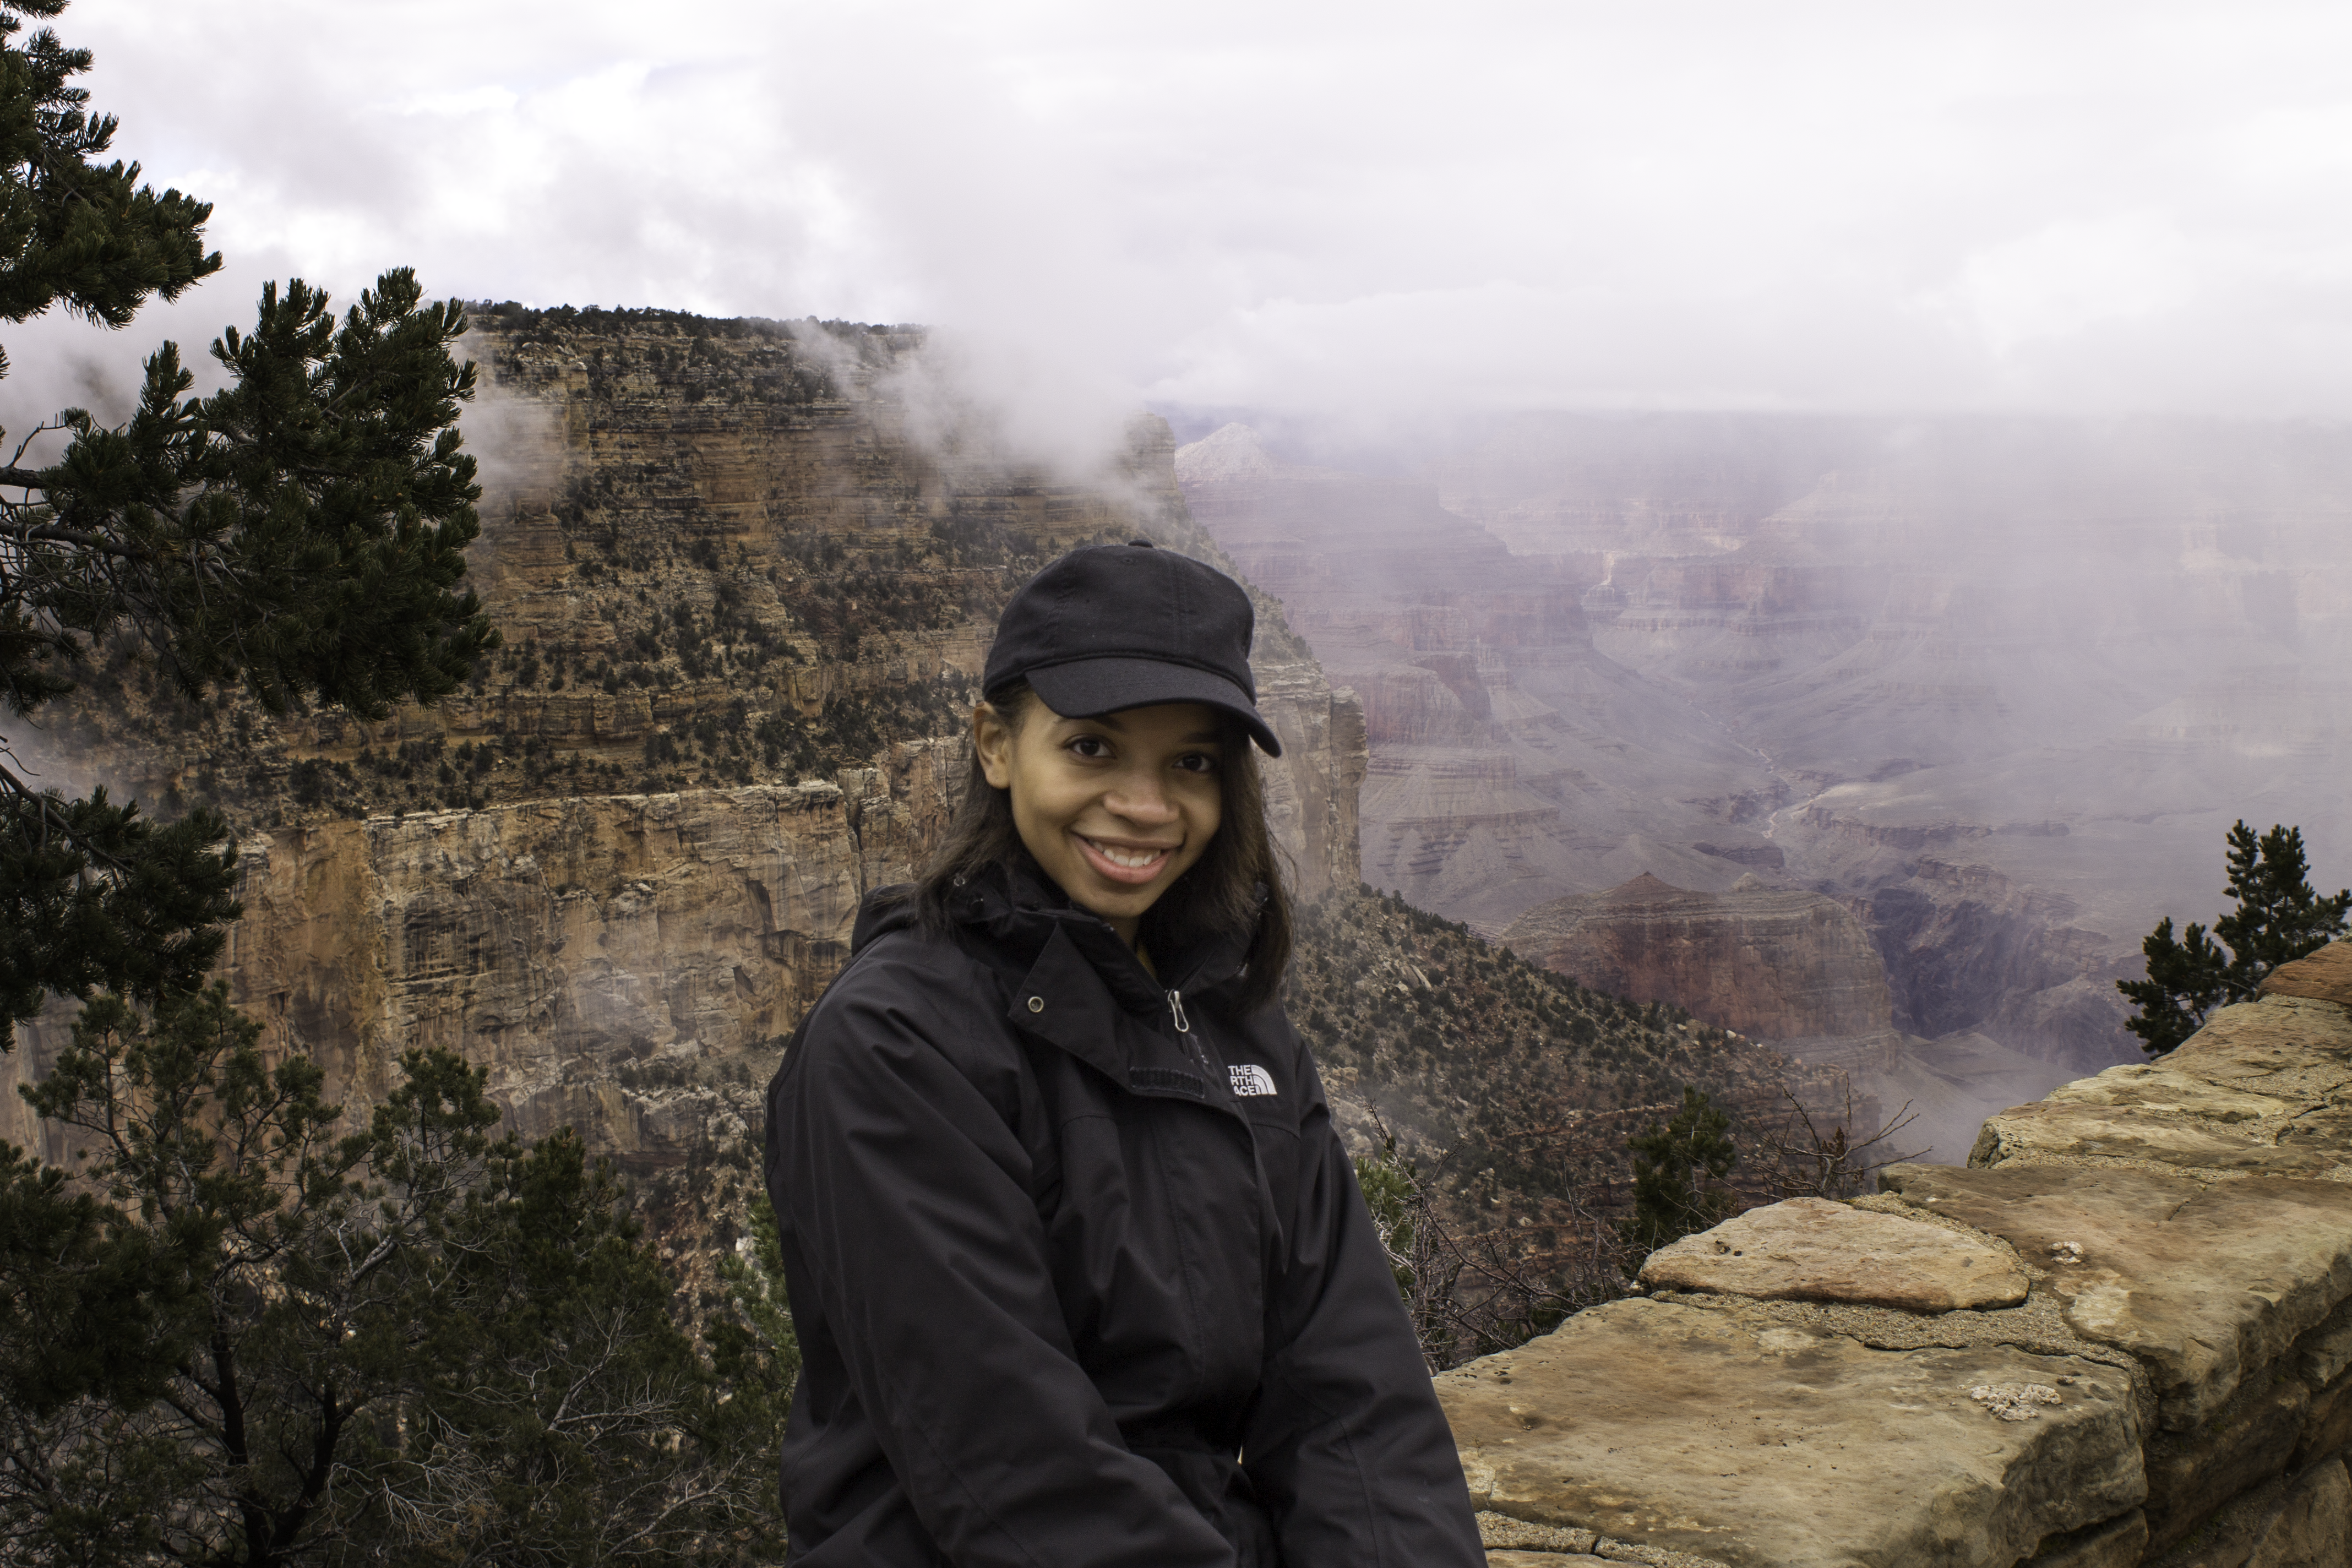 So, last March I went to the Grand Canyon.